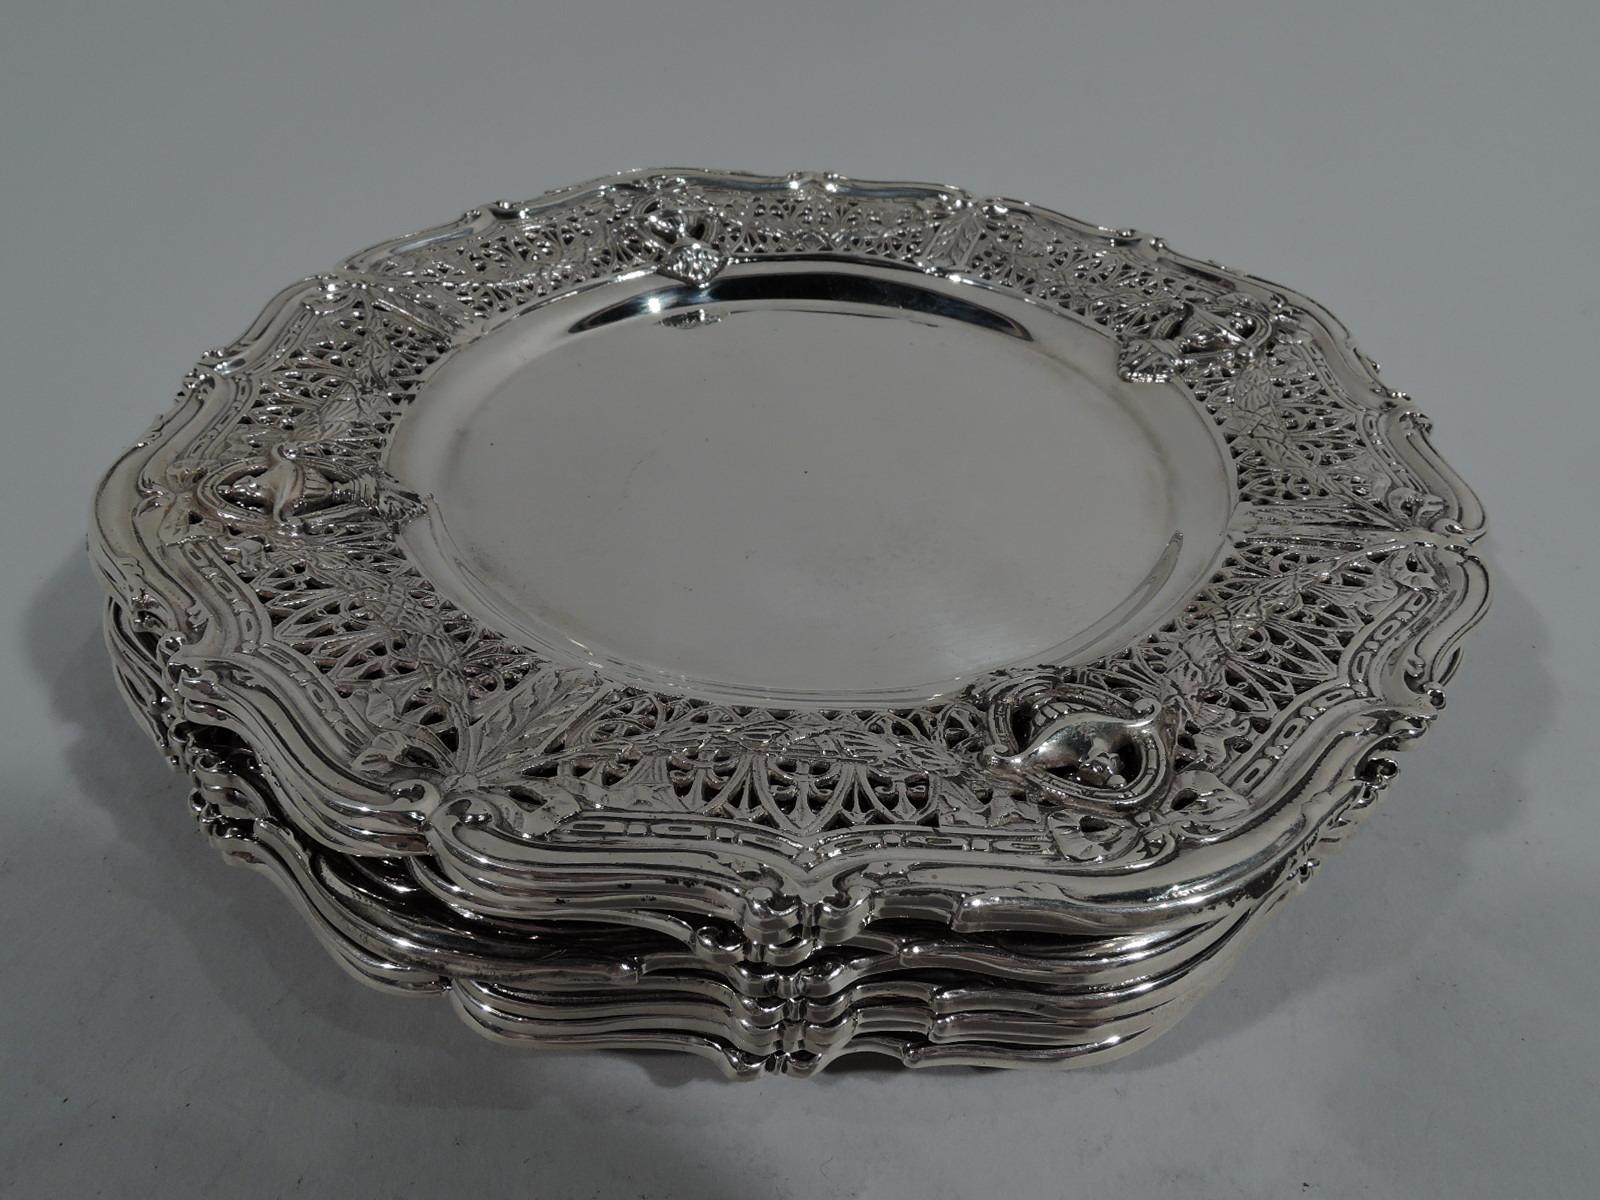 Set of 8 Edwardian Regency sterling silver bread & butter plates in Adam pattern. Made by Shreve & Co. in San Francisco, ca 1915. Round and plain well. Wide shoulder with Classical vases on open rondels joined by leaf swag on pierced fern ground.